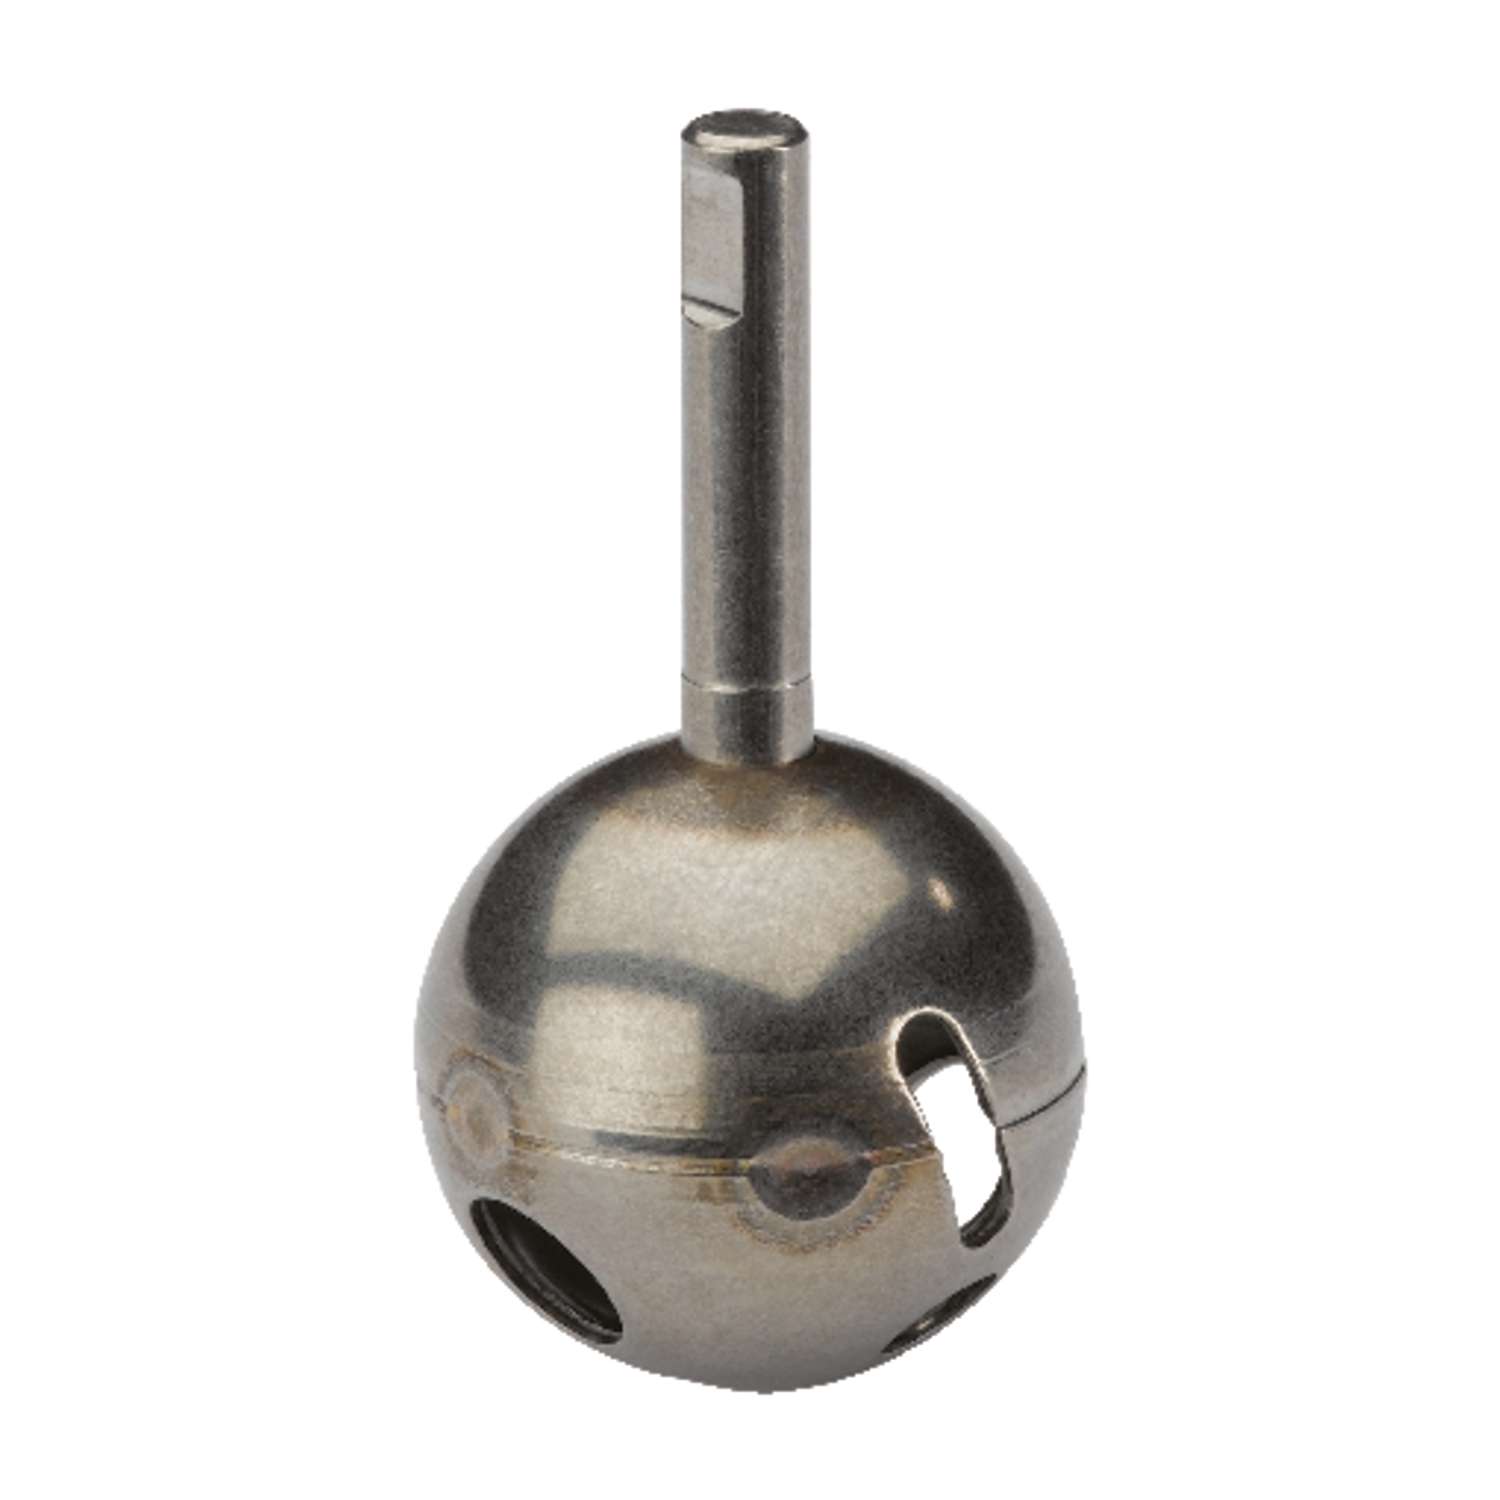 Delta Stainless Steel Faucet Ball Assembly For Delta Ace Hardware